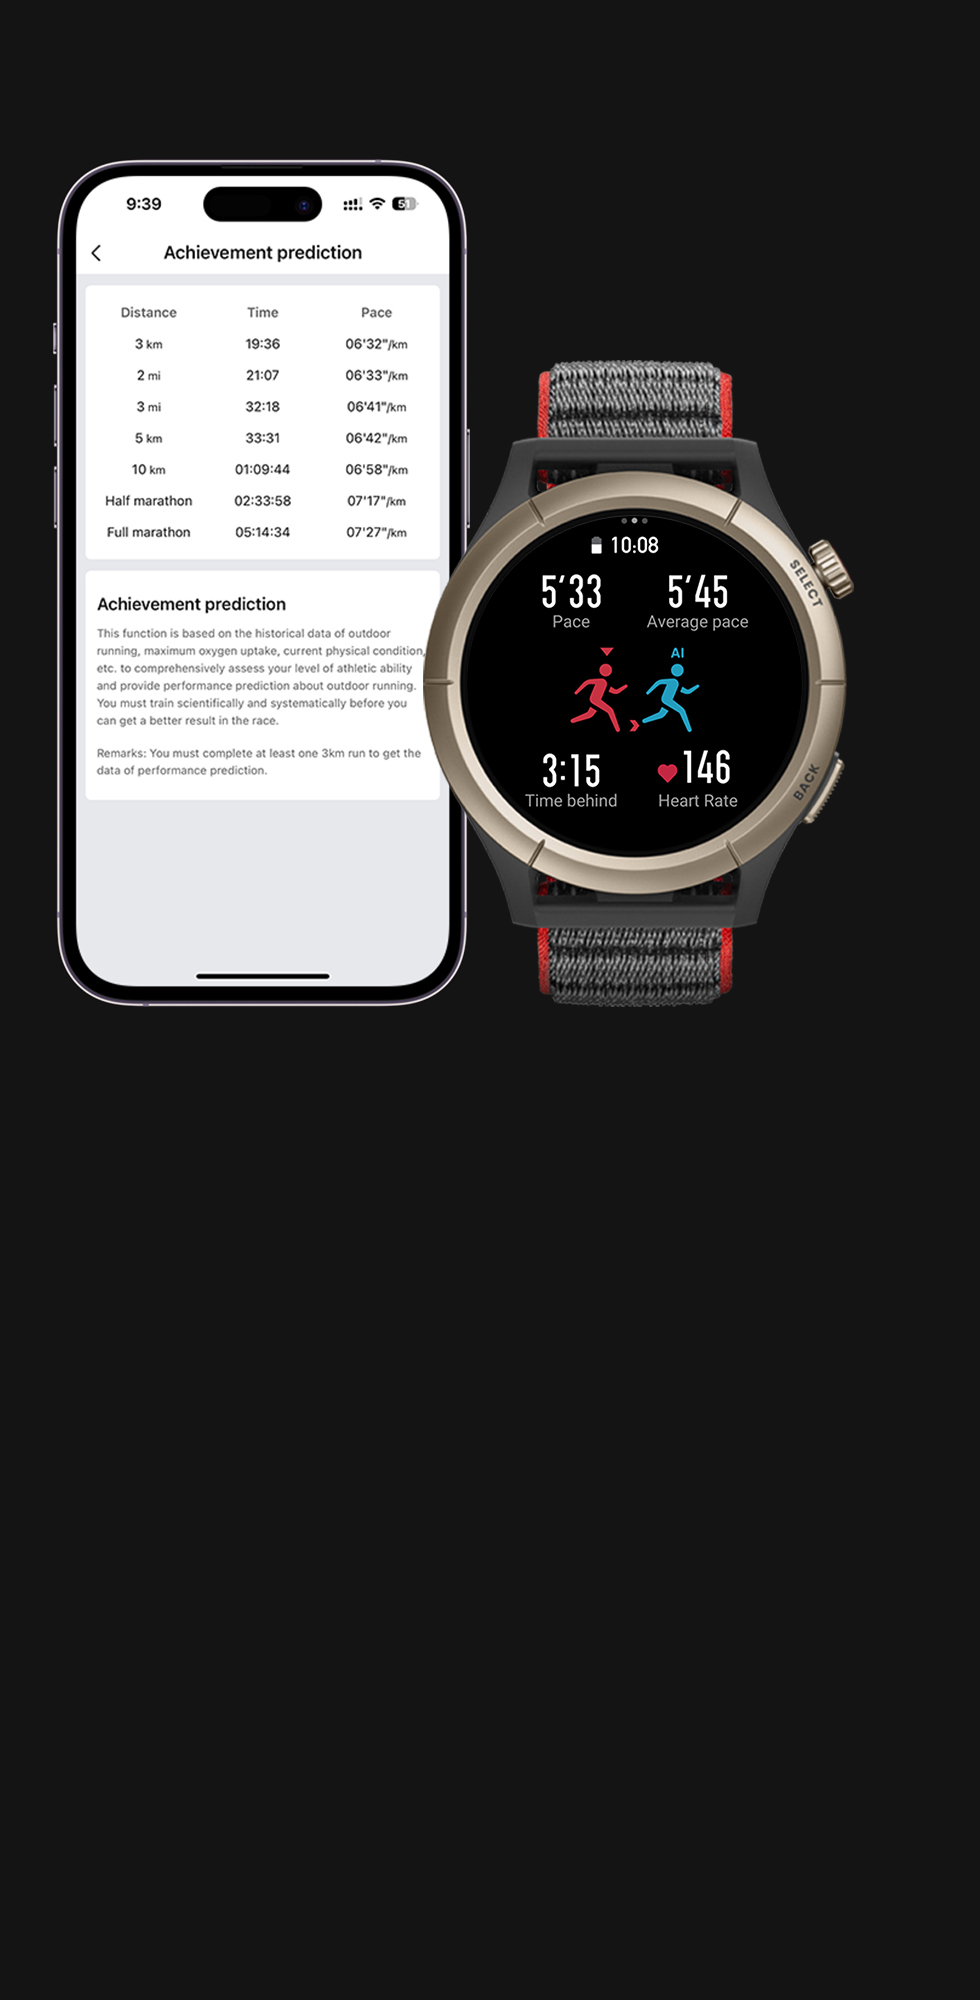 Amazfit Cheetah series smartwatches coming to India with built-in AI  running coach - Gizmochina